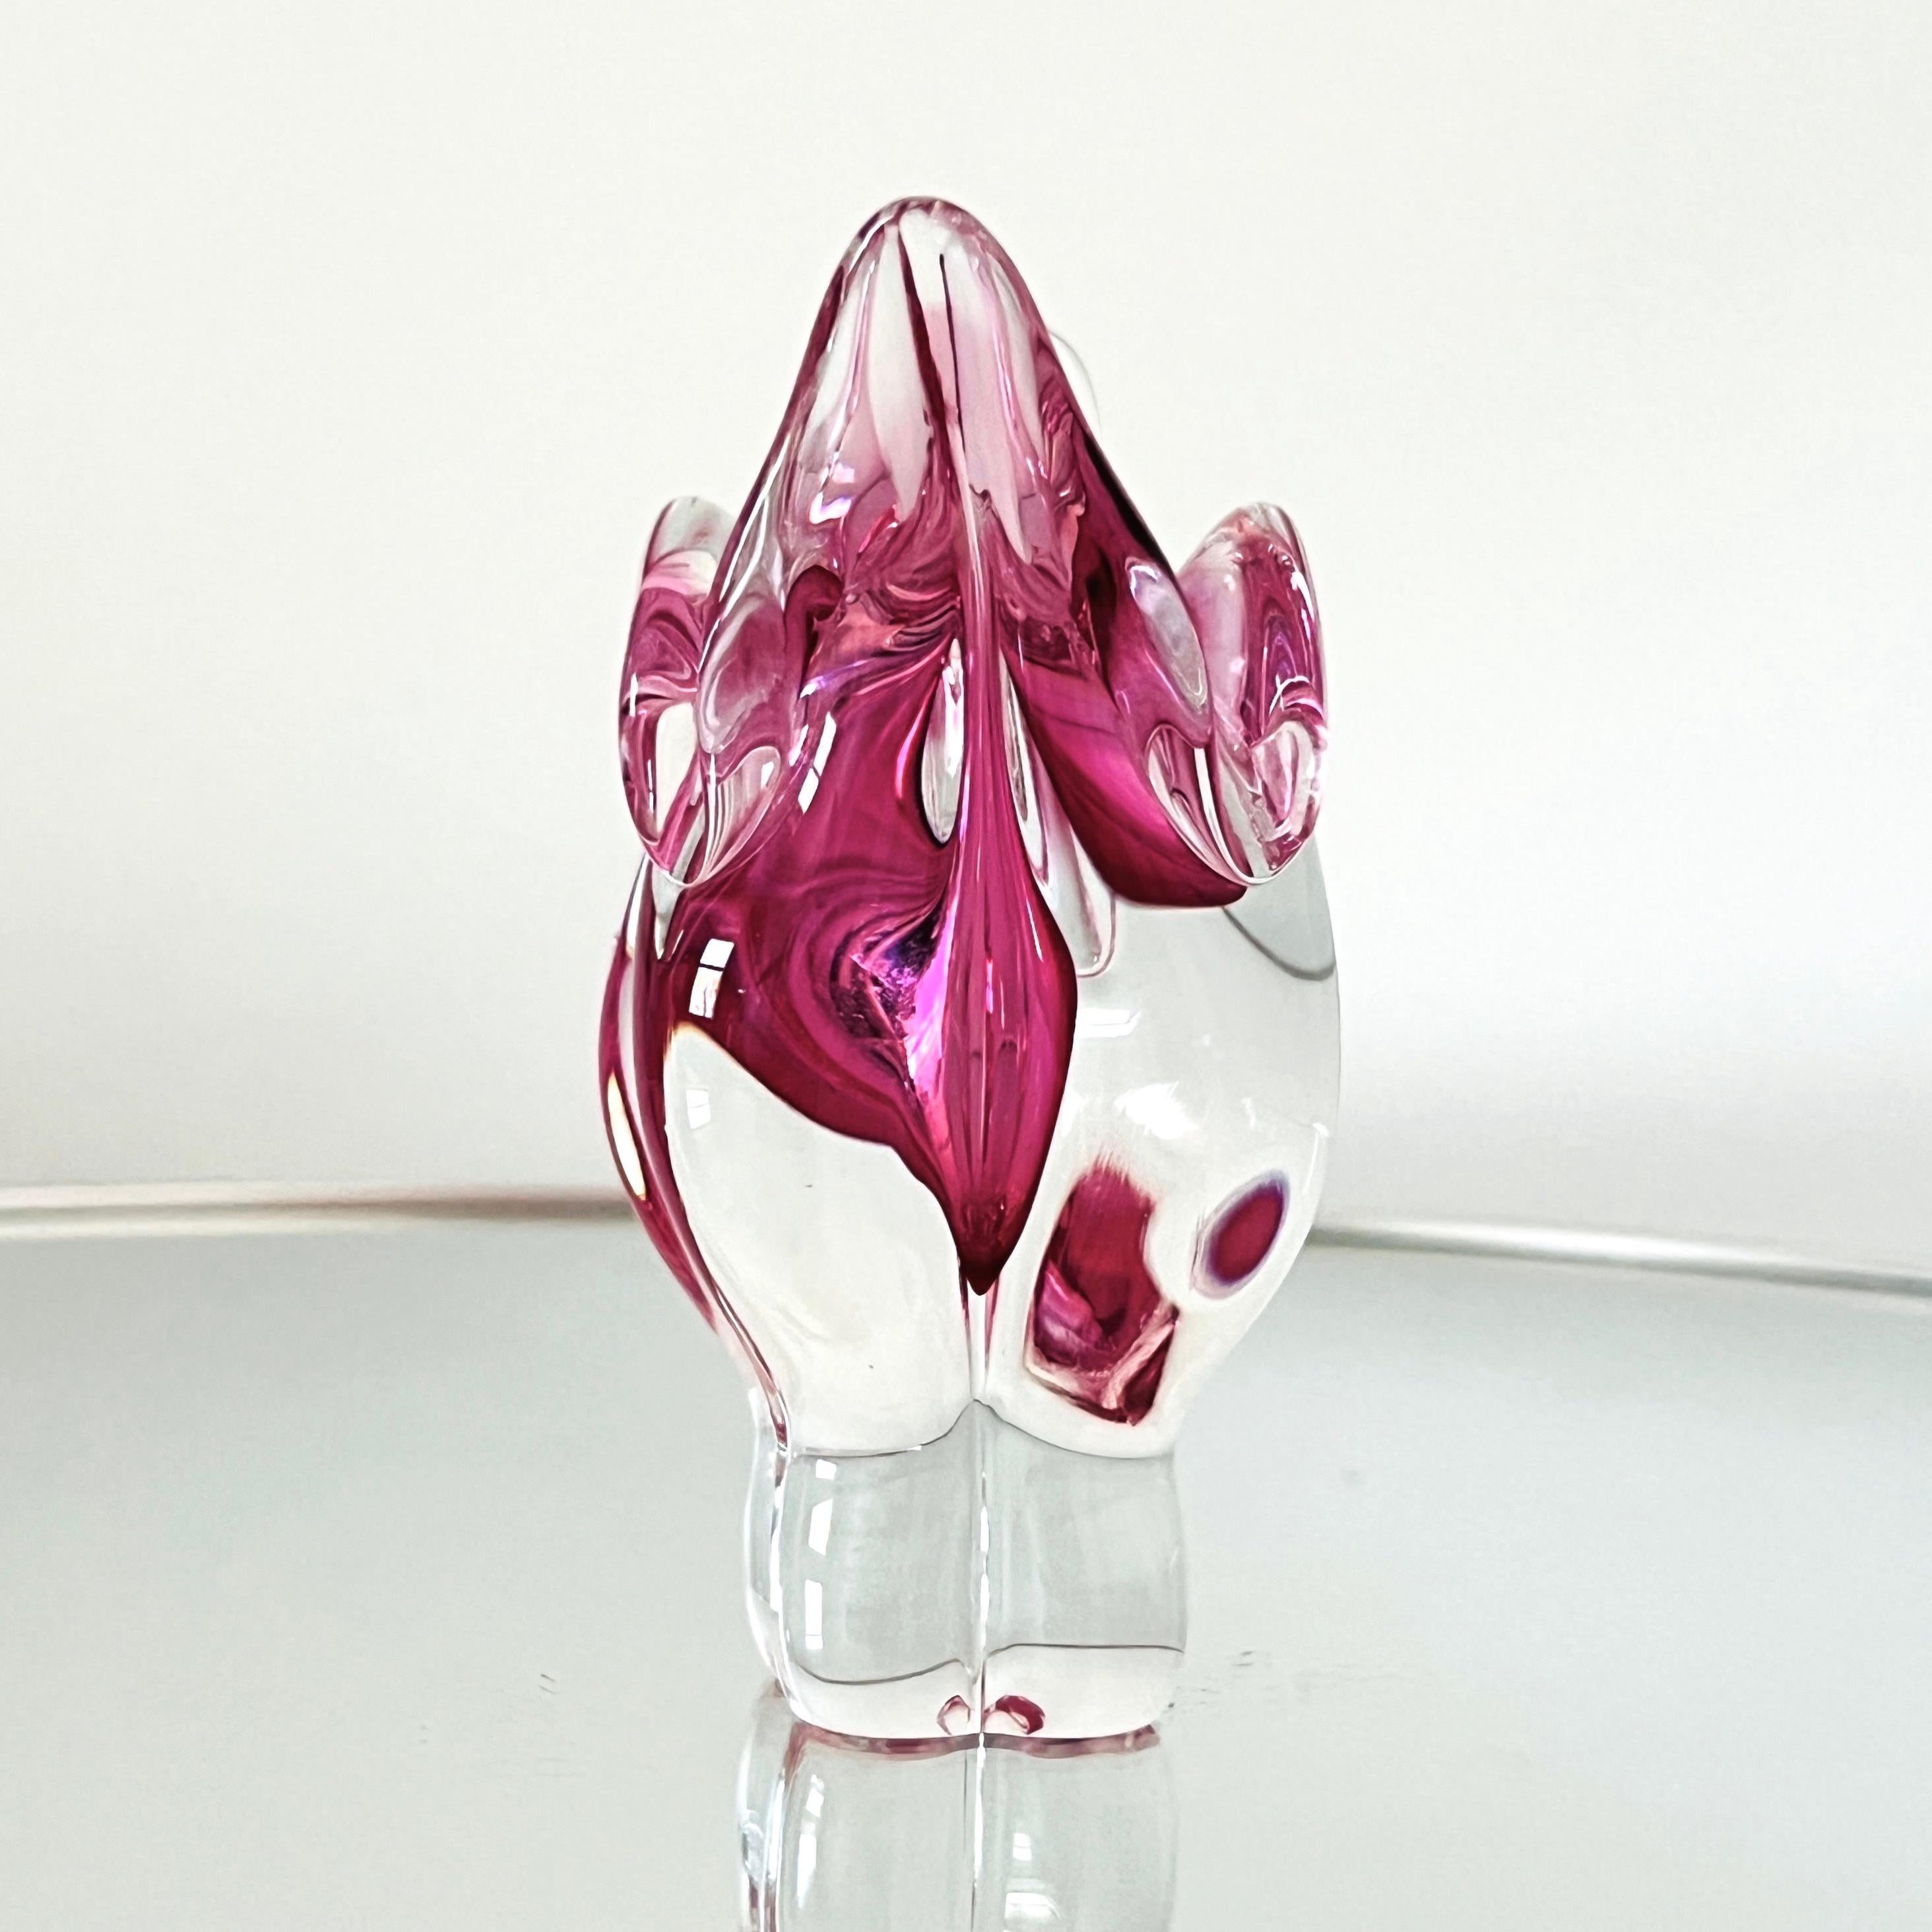 Mid-20th Century Murano Pink Violet Bud Vase with Tulip Shape, circa. 1950s